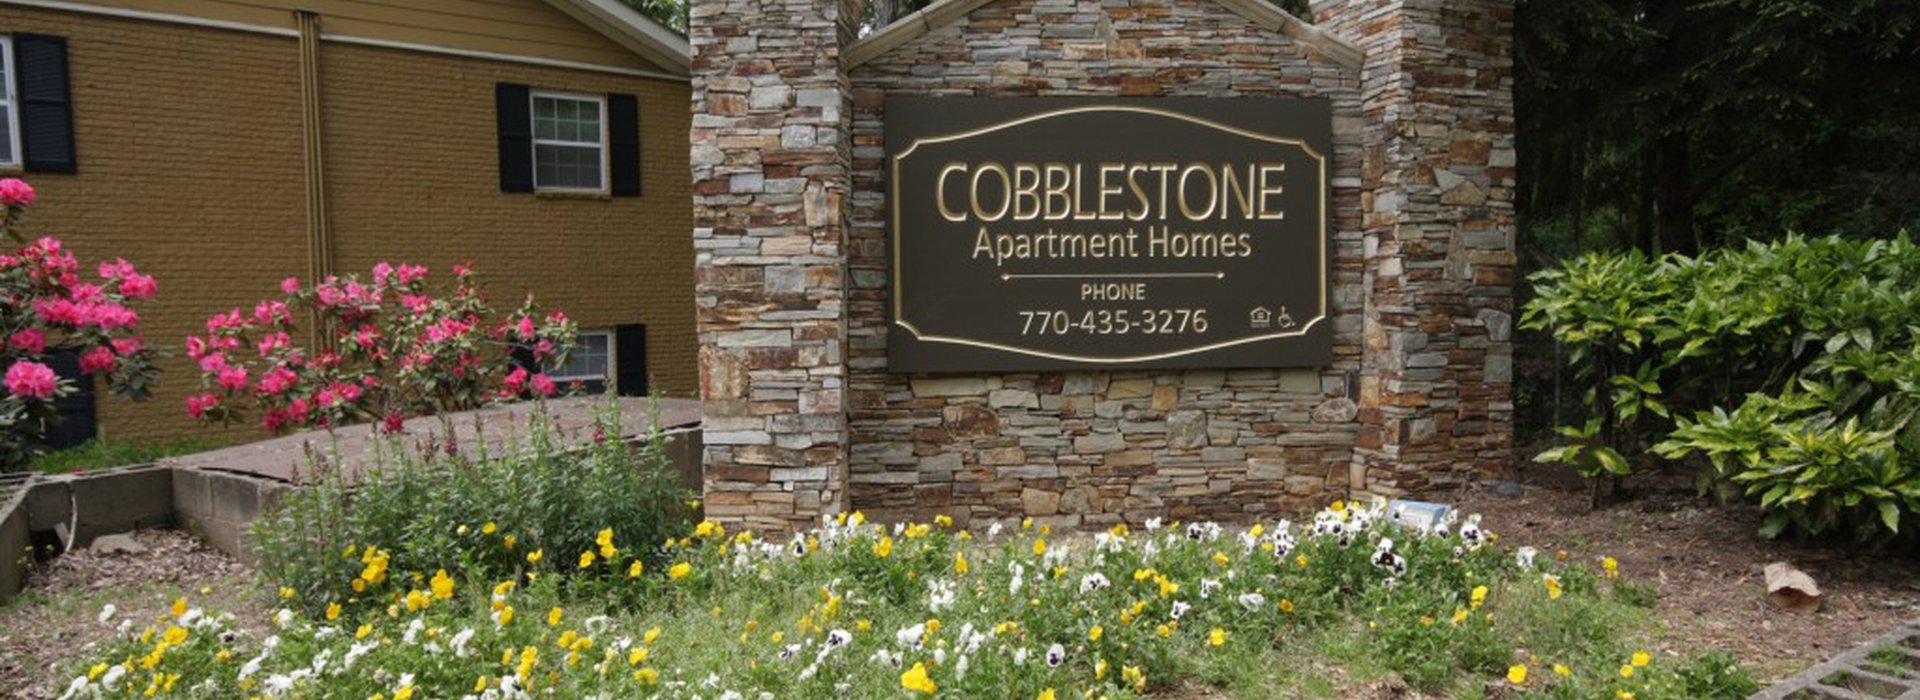 Cobblestone Apartment Home sign at the entrance